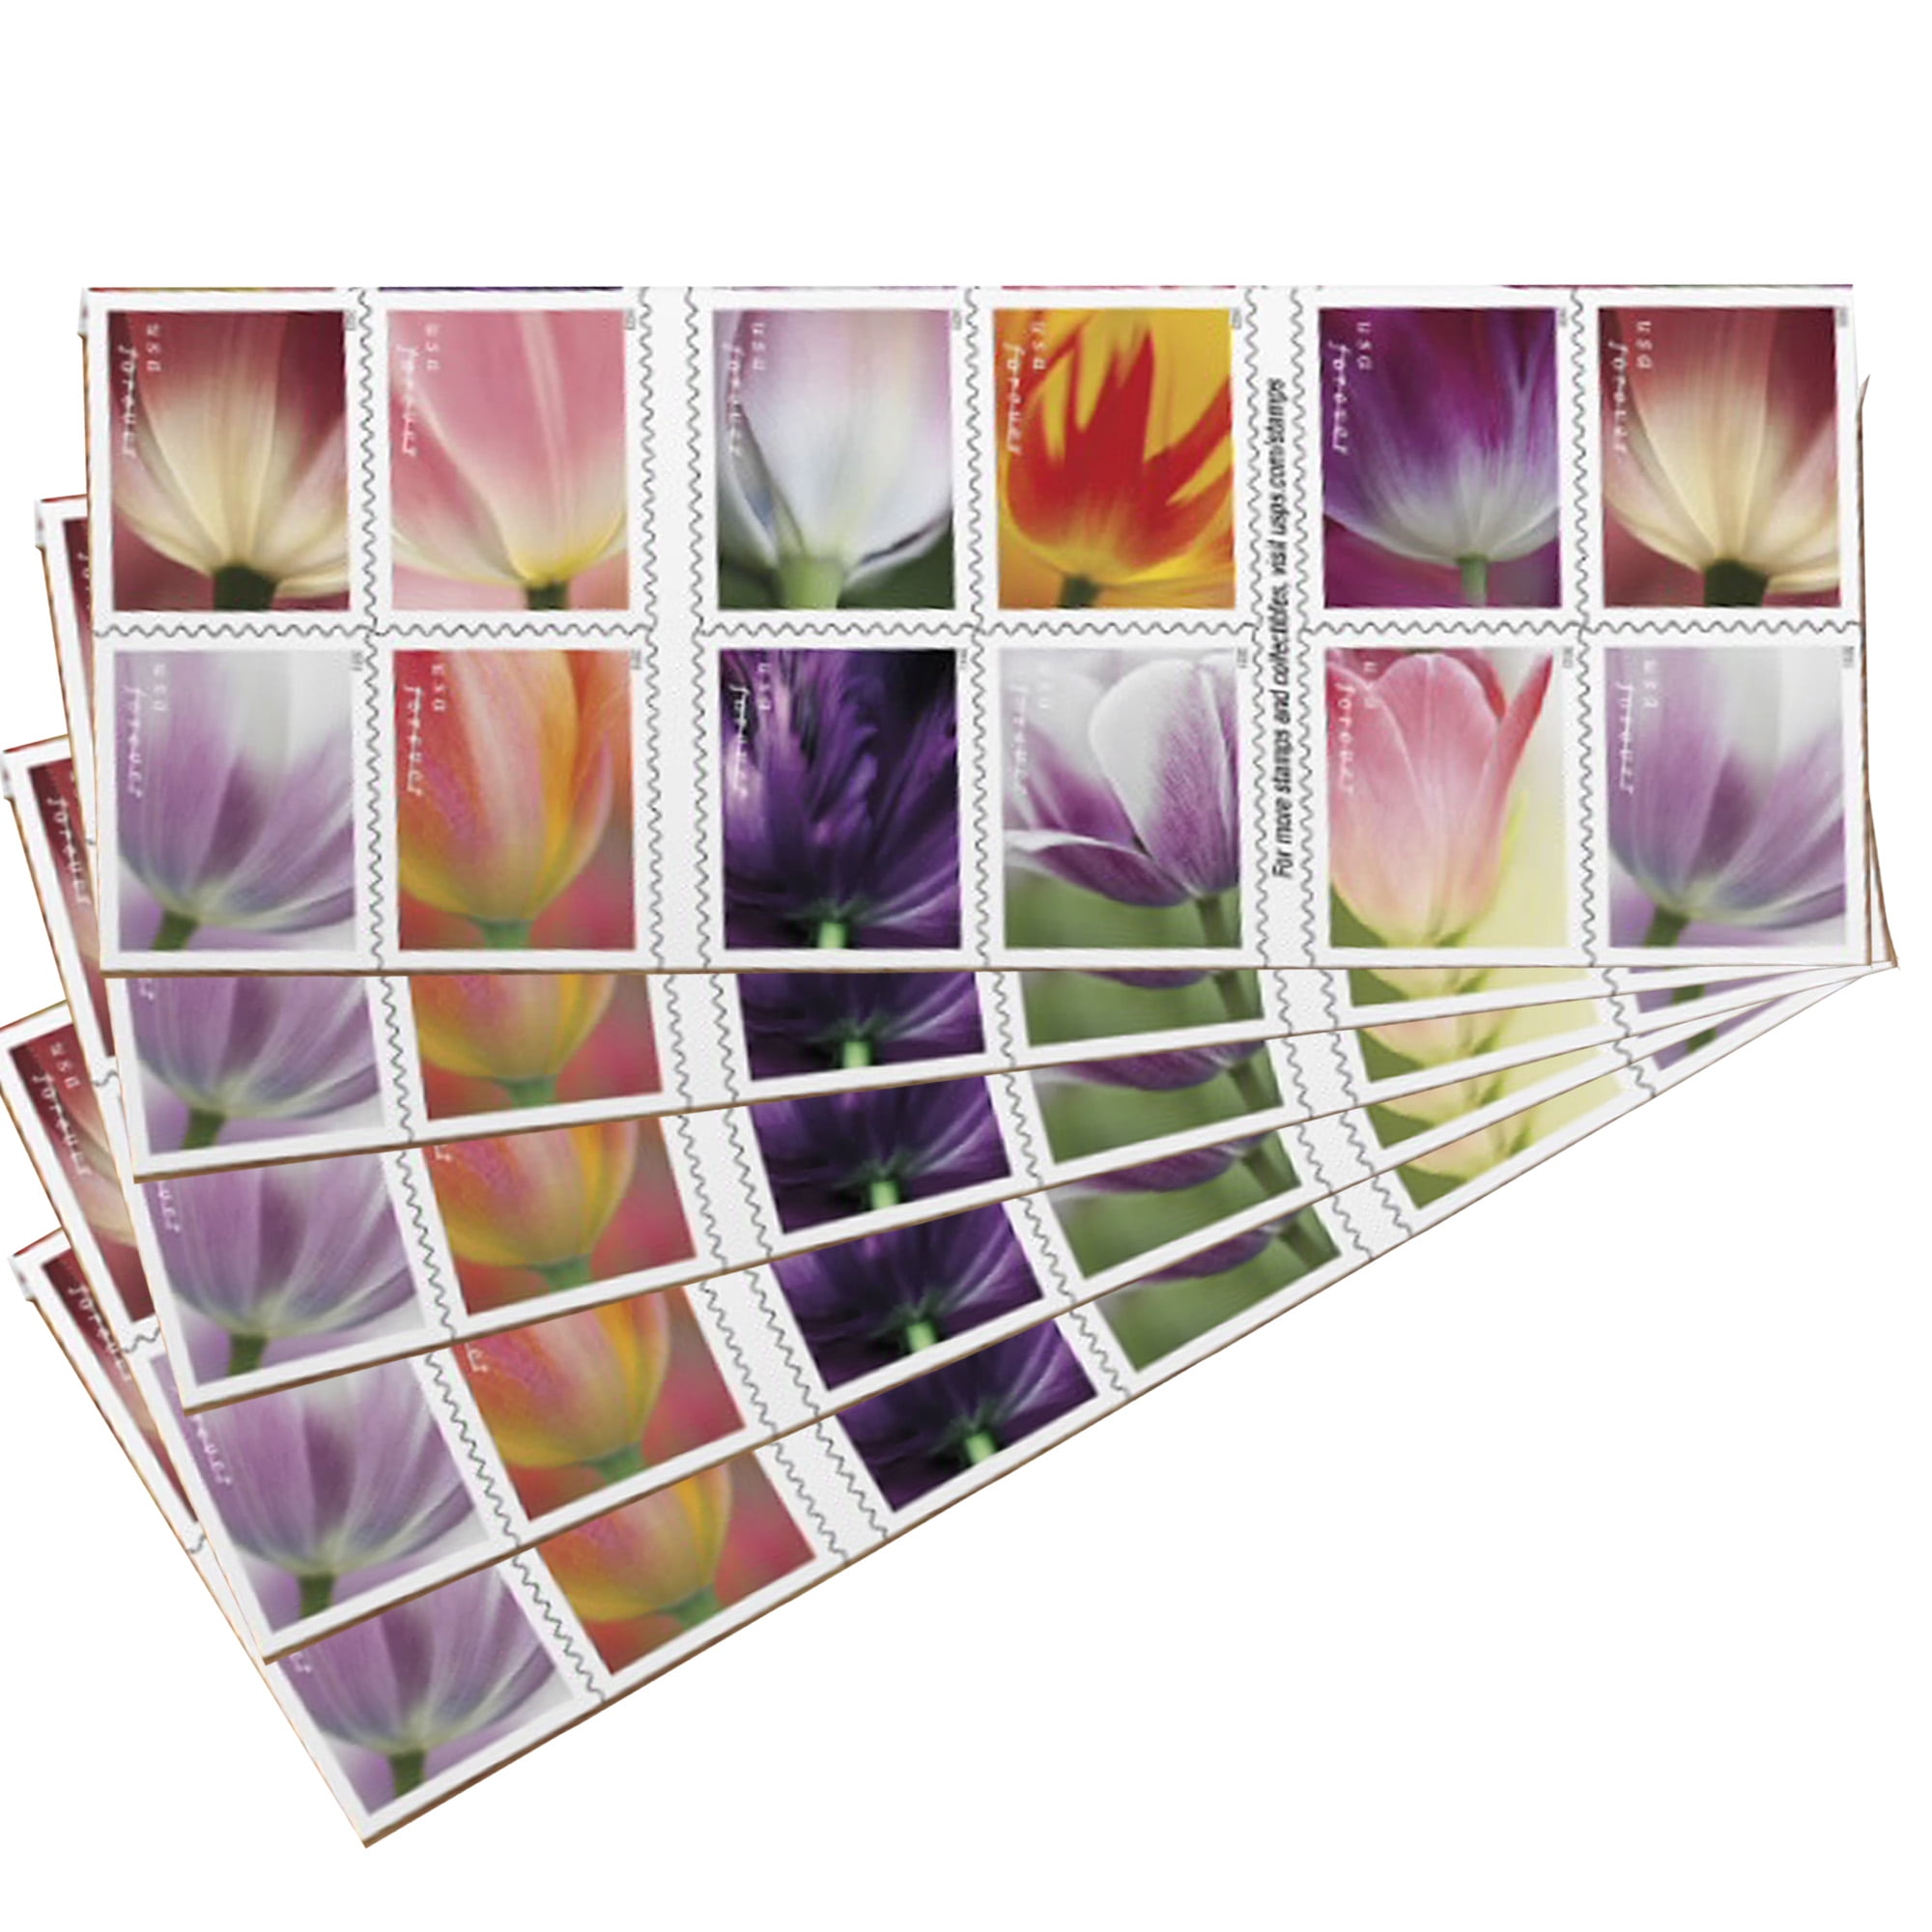 20pcs Garden Beauty Forever Postage Stamps Wedding Celebration Anniversary  Flowers Party Supplies